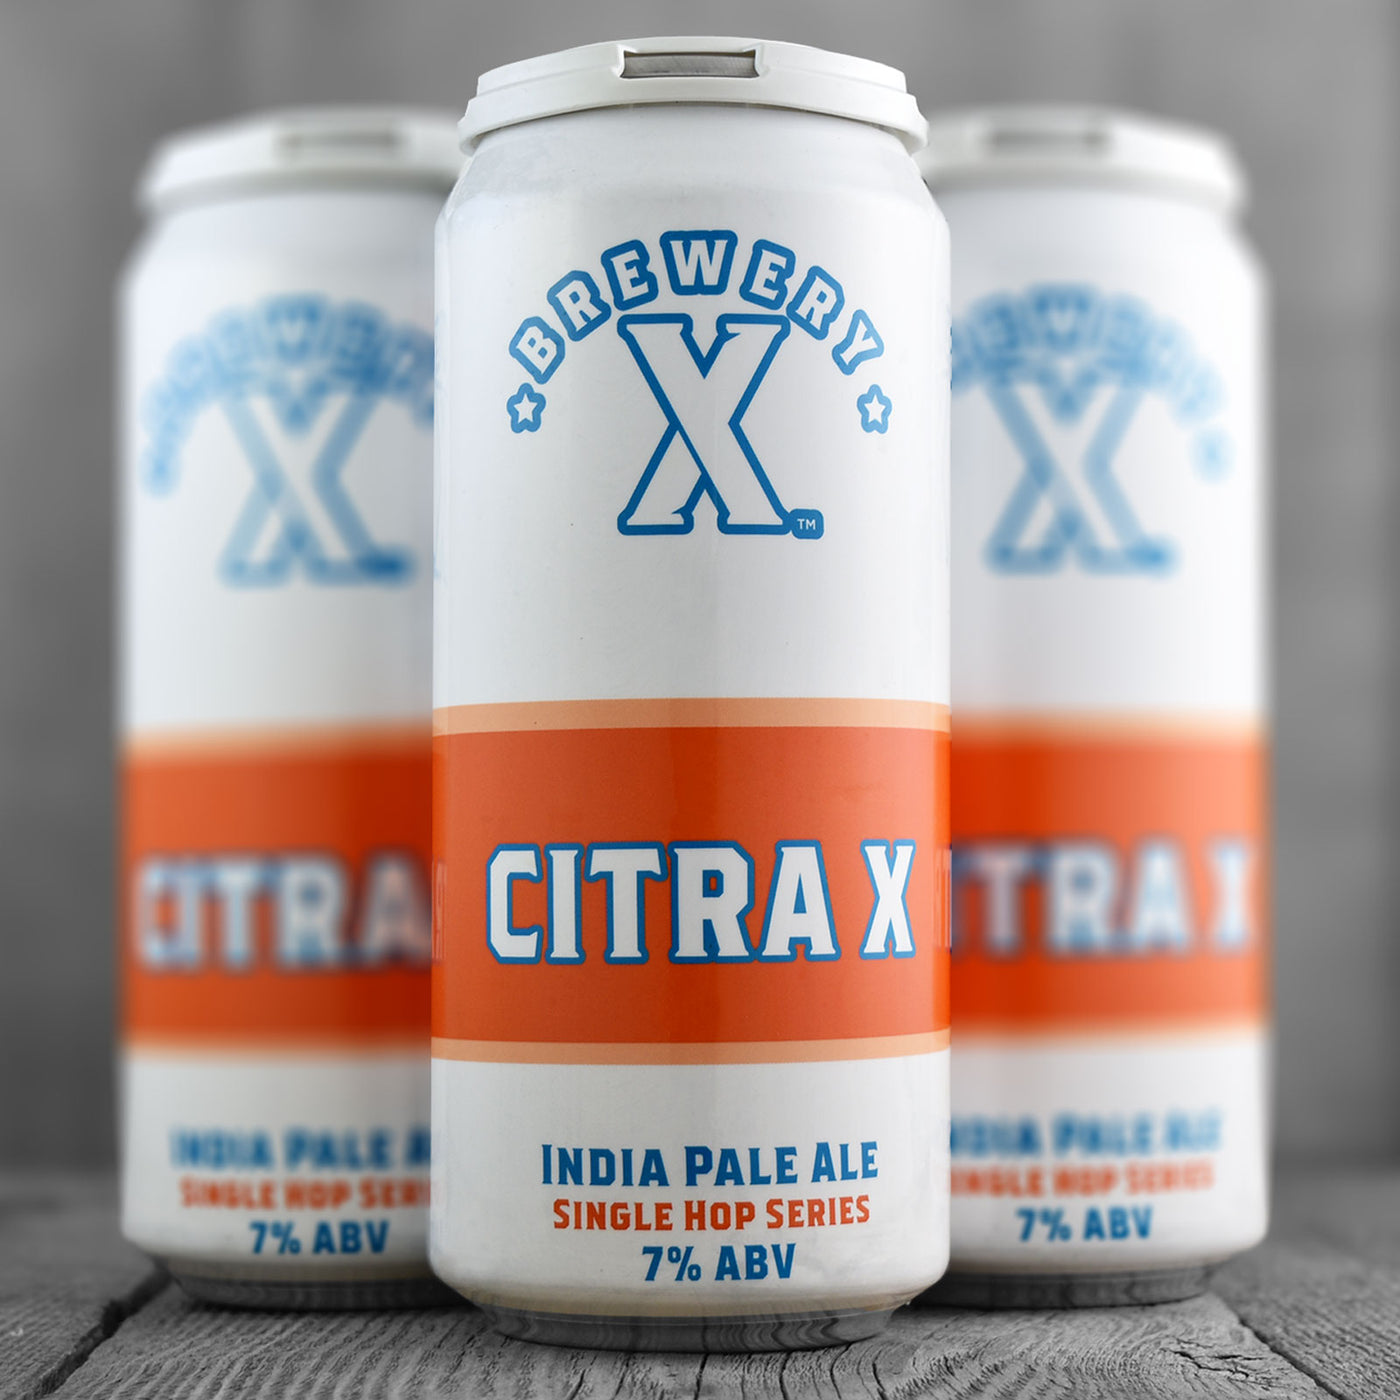 Brewery X Citra X